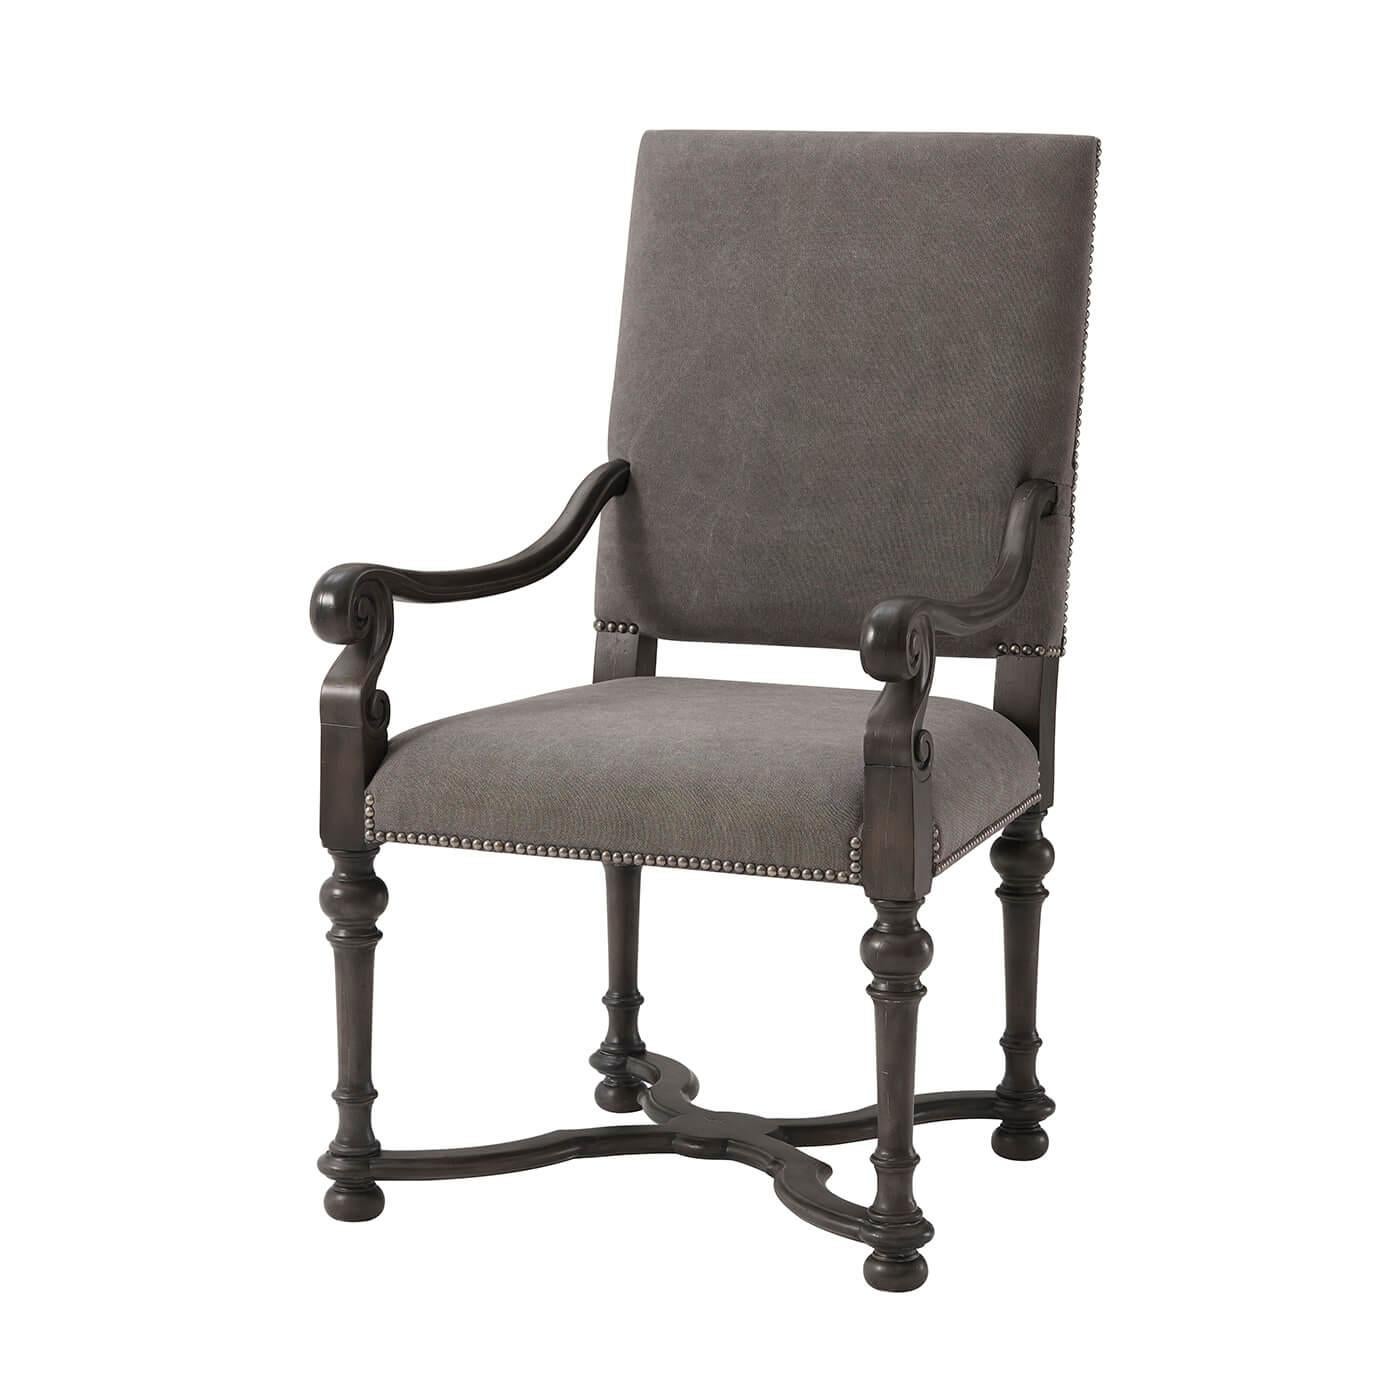 A Louis XIV style French dining chair with a square padded and upholstered backrest and seat, with carved scrolling arms, on turned legs with an X-stretcher base and finished with detailed antiqued brass nailheads.
Armchair dimensions: 25